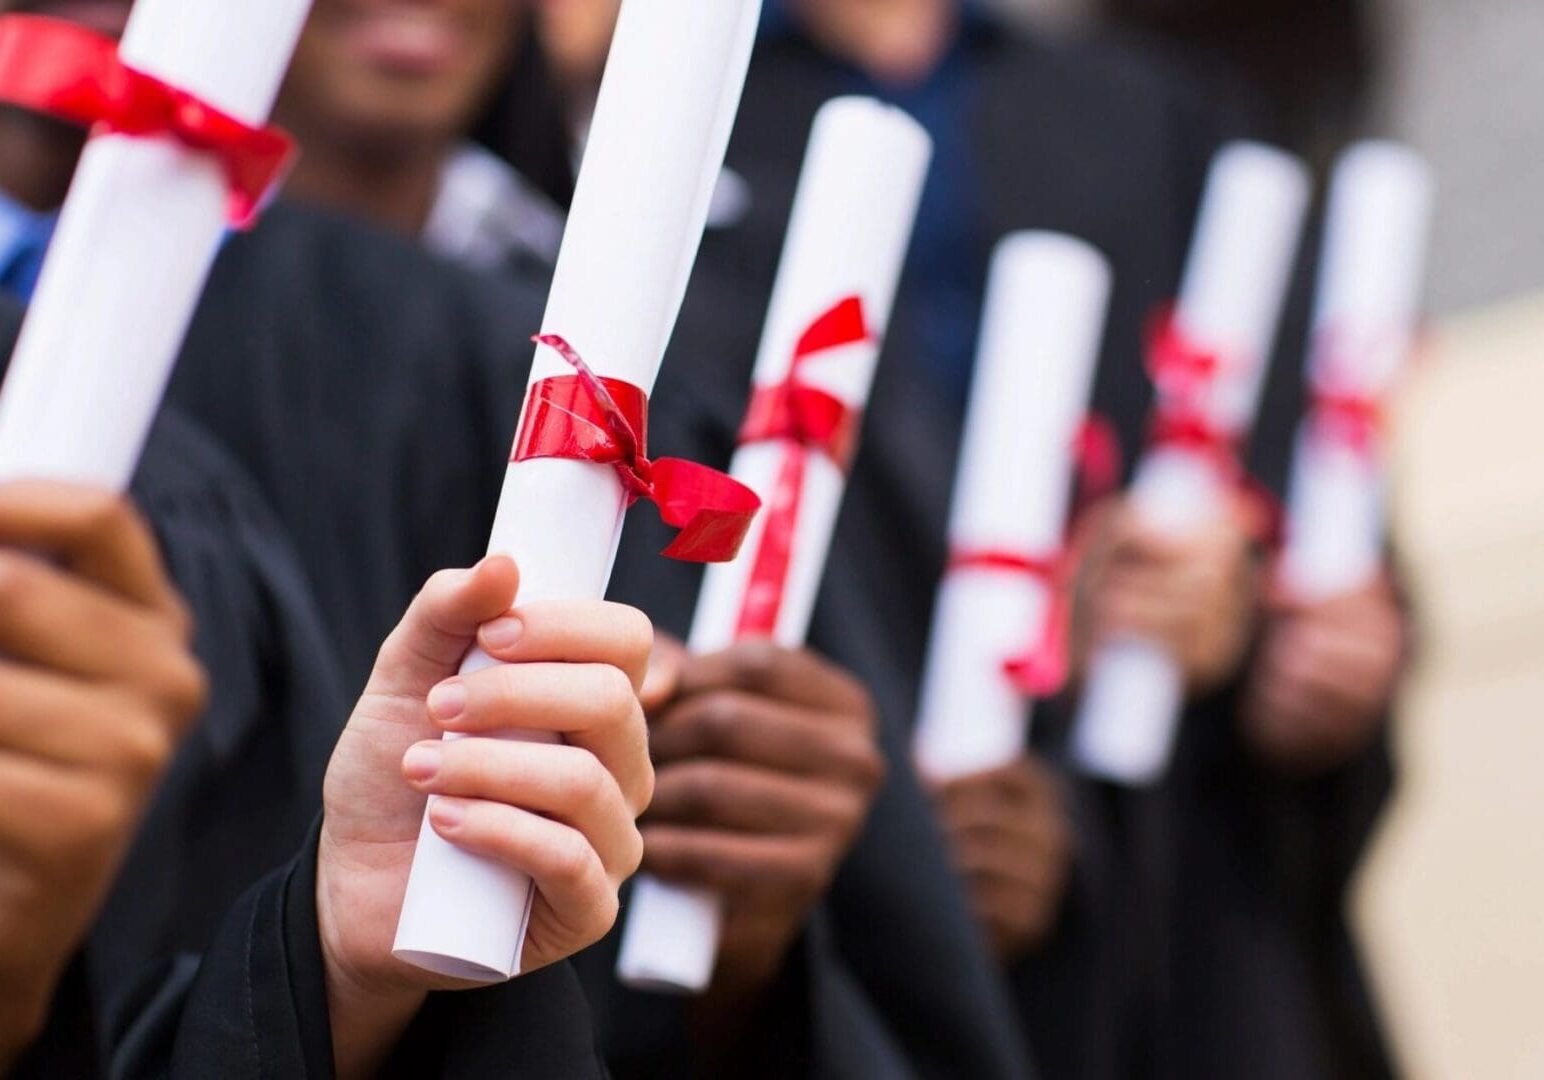 Graduates in black robes holding diplomas with red ribbons, close-up of their hands and diplomas.